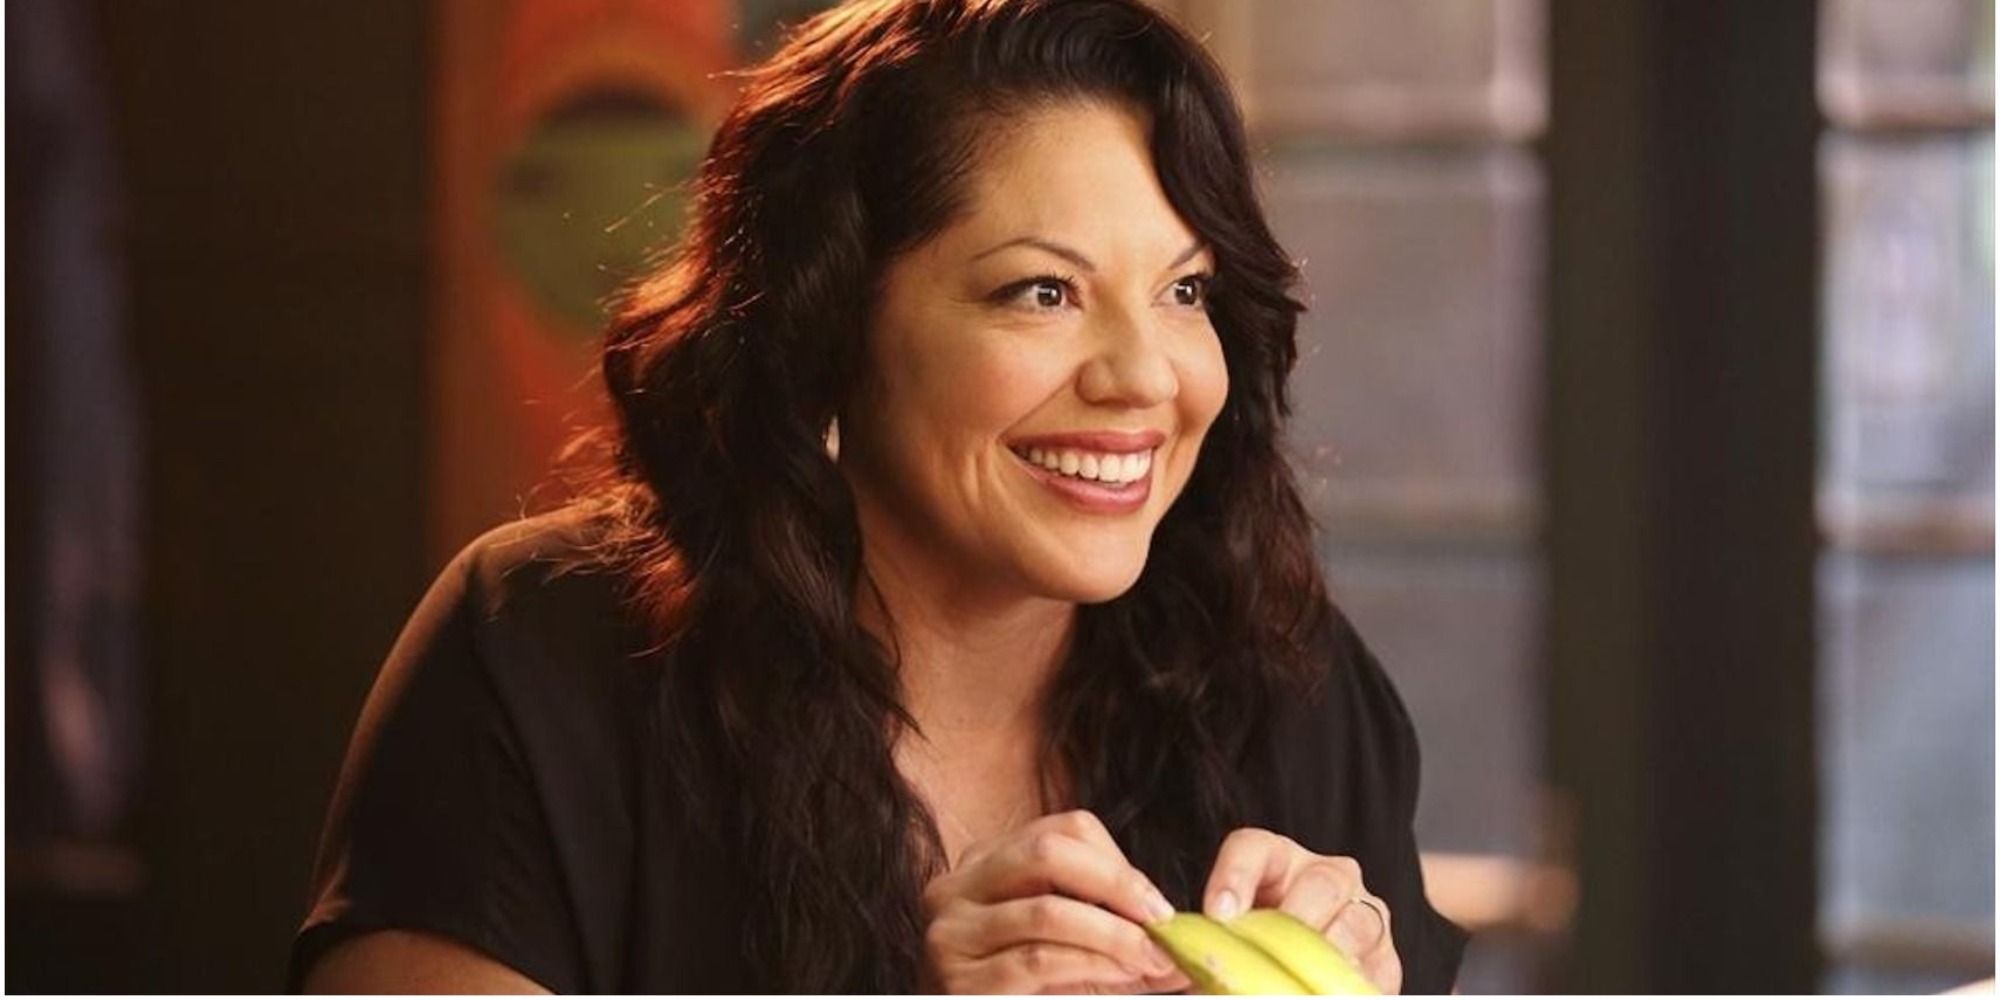 An image of Callie smiling to someone off screen while she has a drink at Joe's Bar in Grey's Anatomy